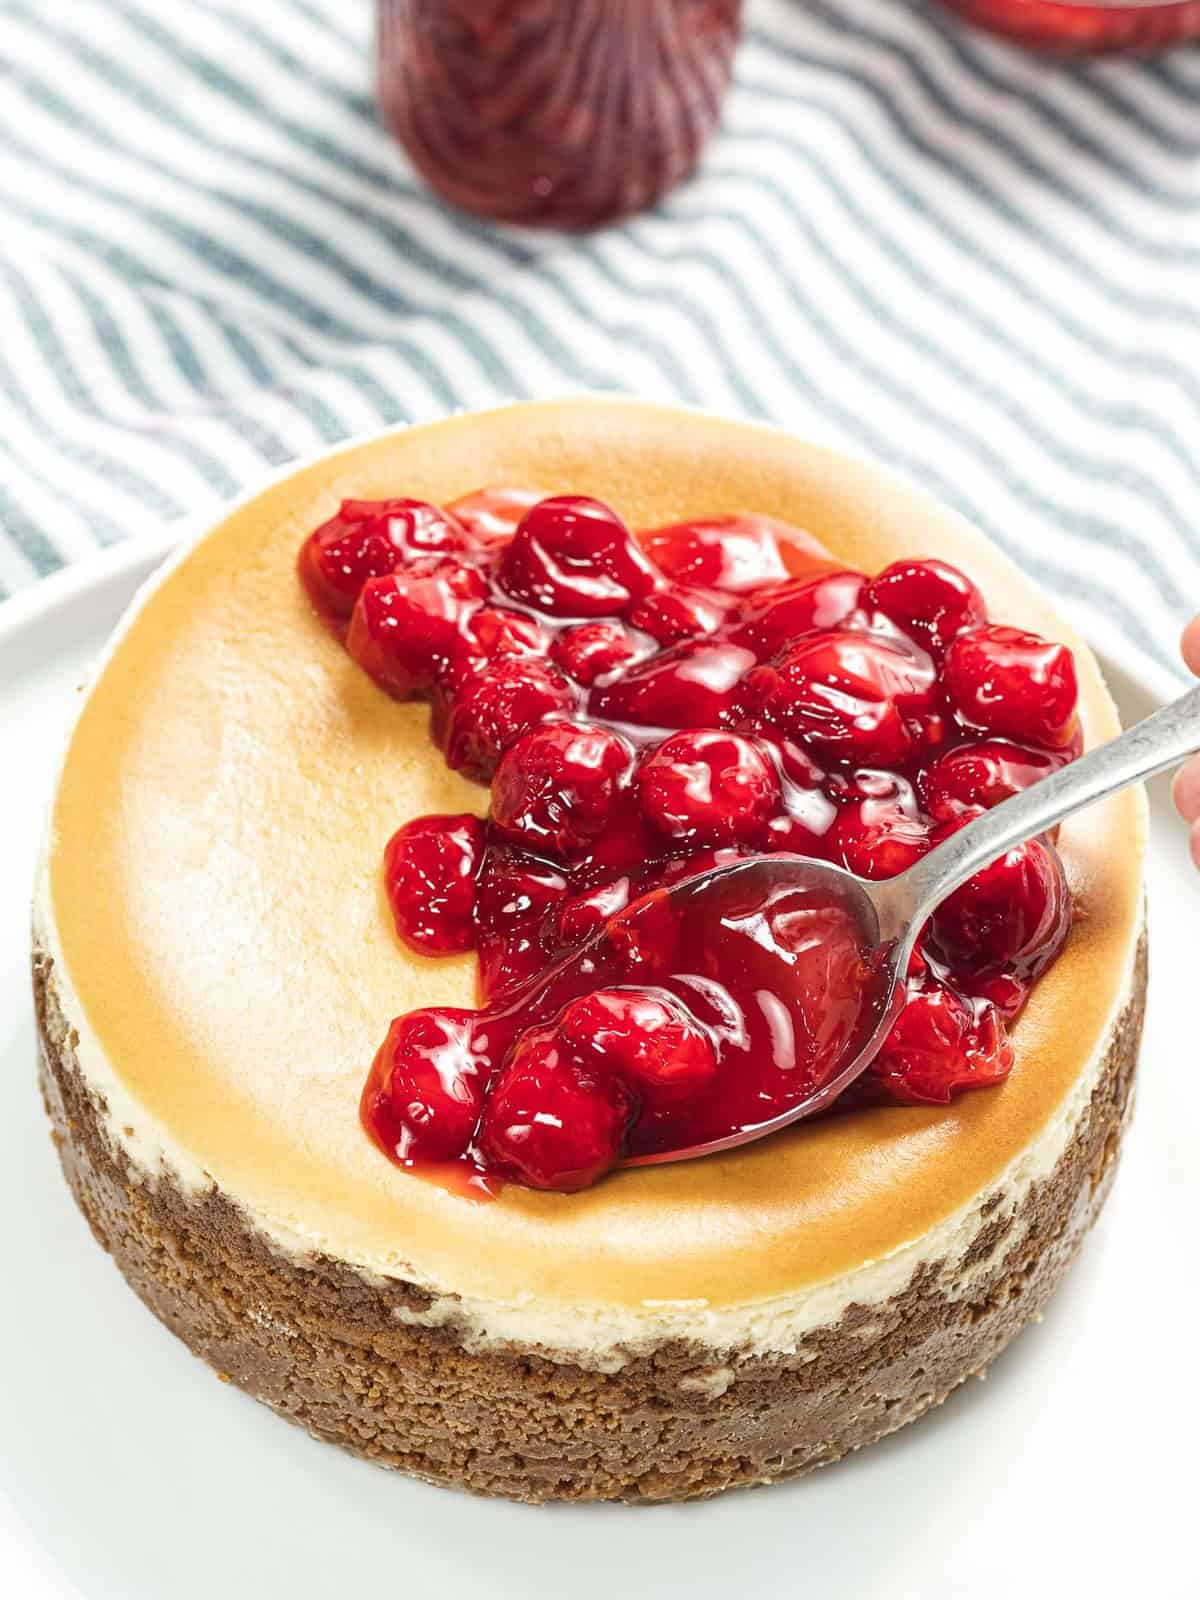 The cherry topping is spooned onto a cheesecake.